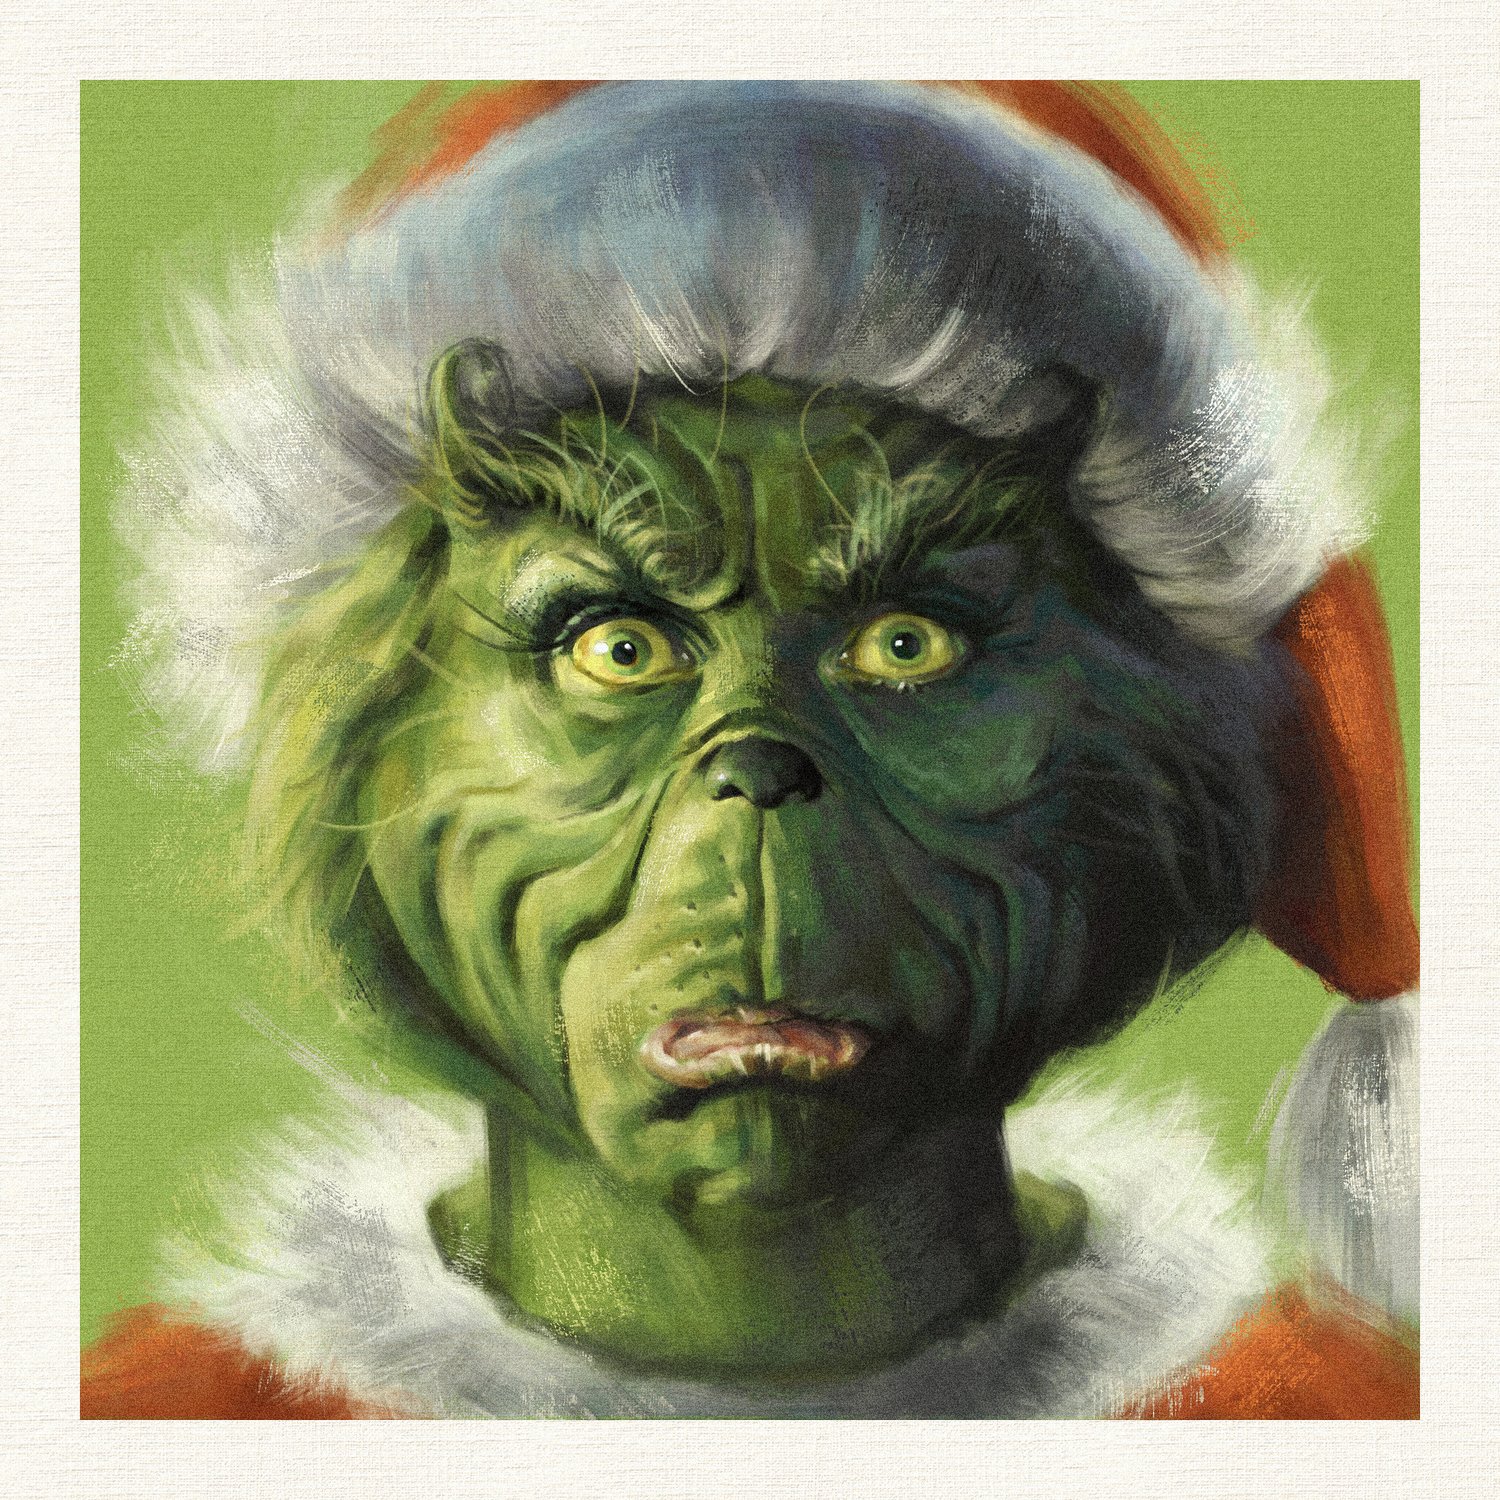 Image of The Grinch